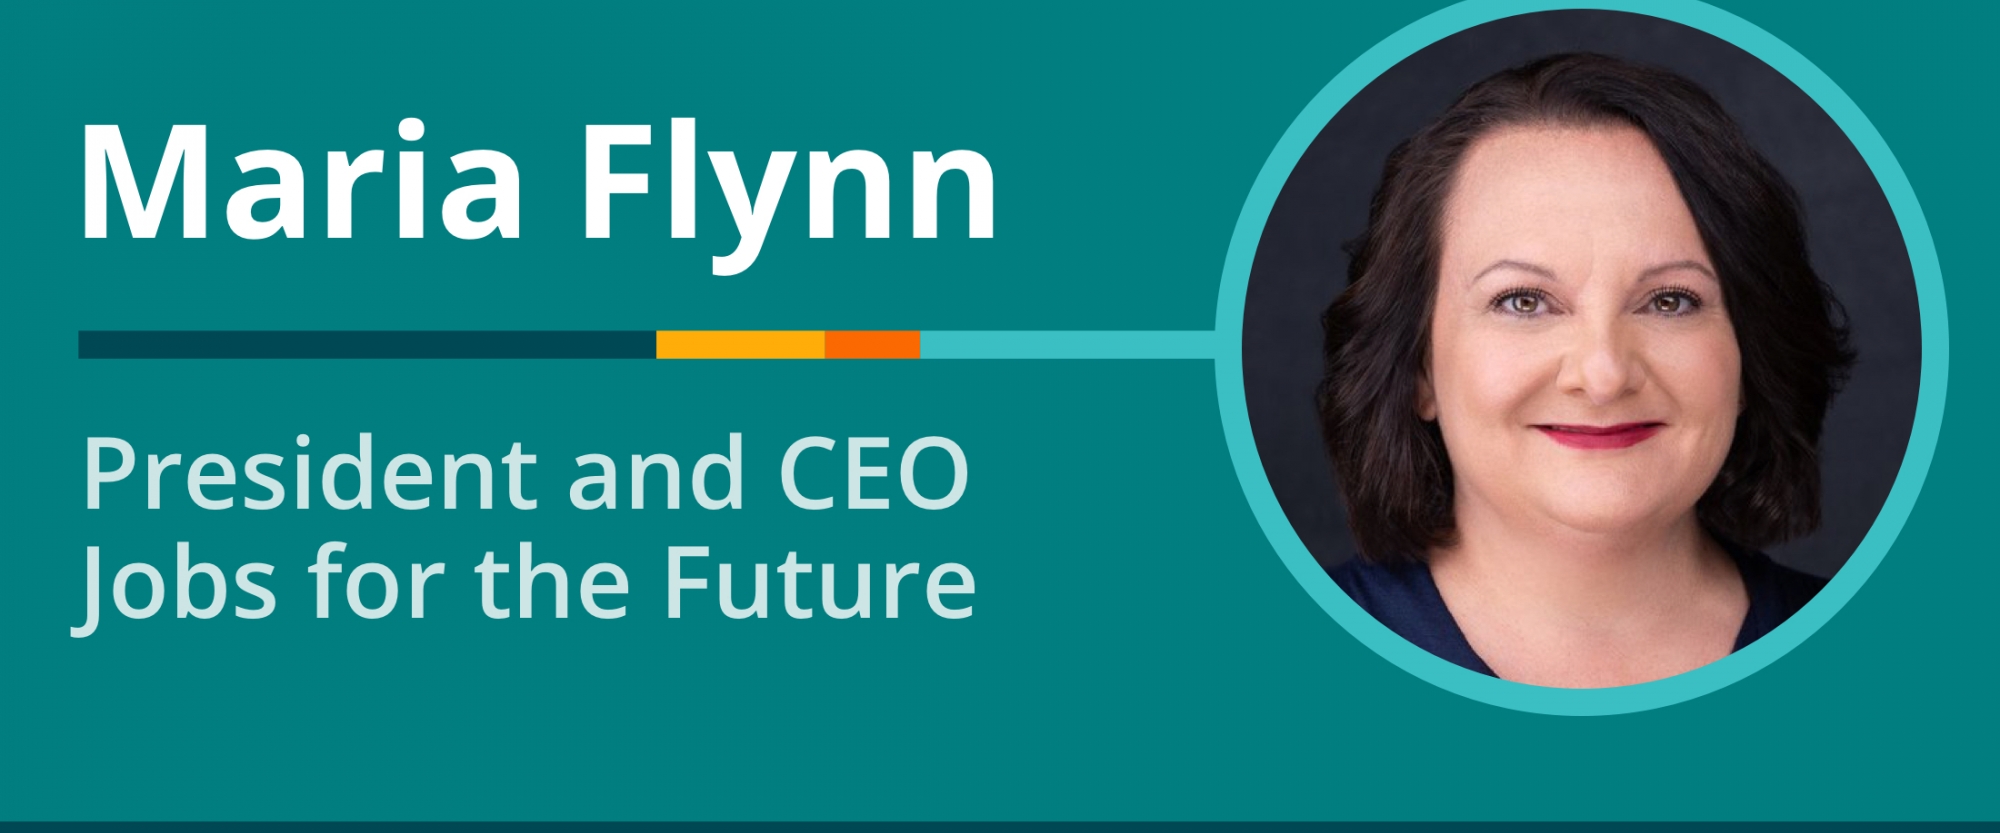 Weekly Wisdom 6/14/21: Transcript of Conversation With Maria Flynn, President and CEO of Jobs for the Future